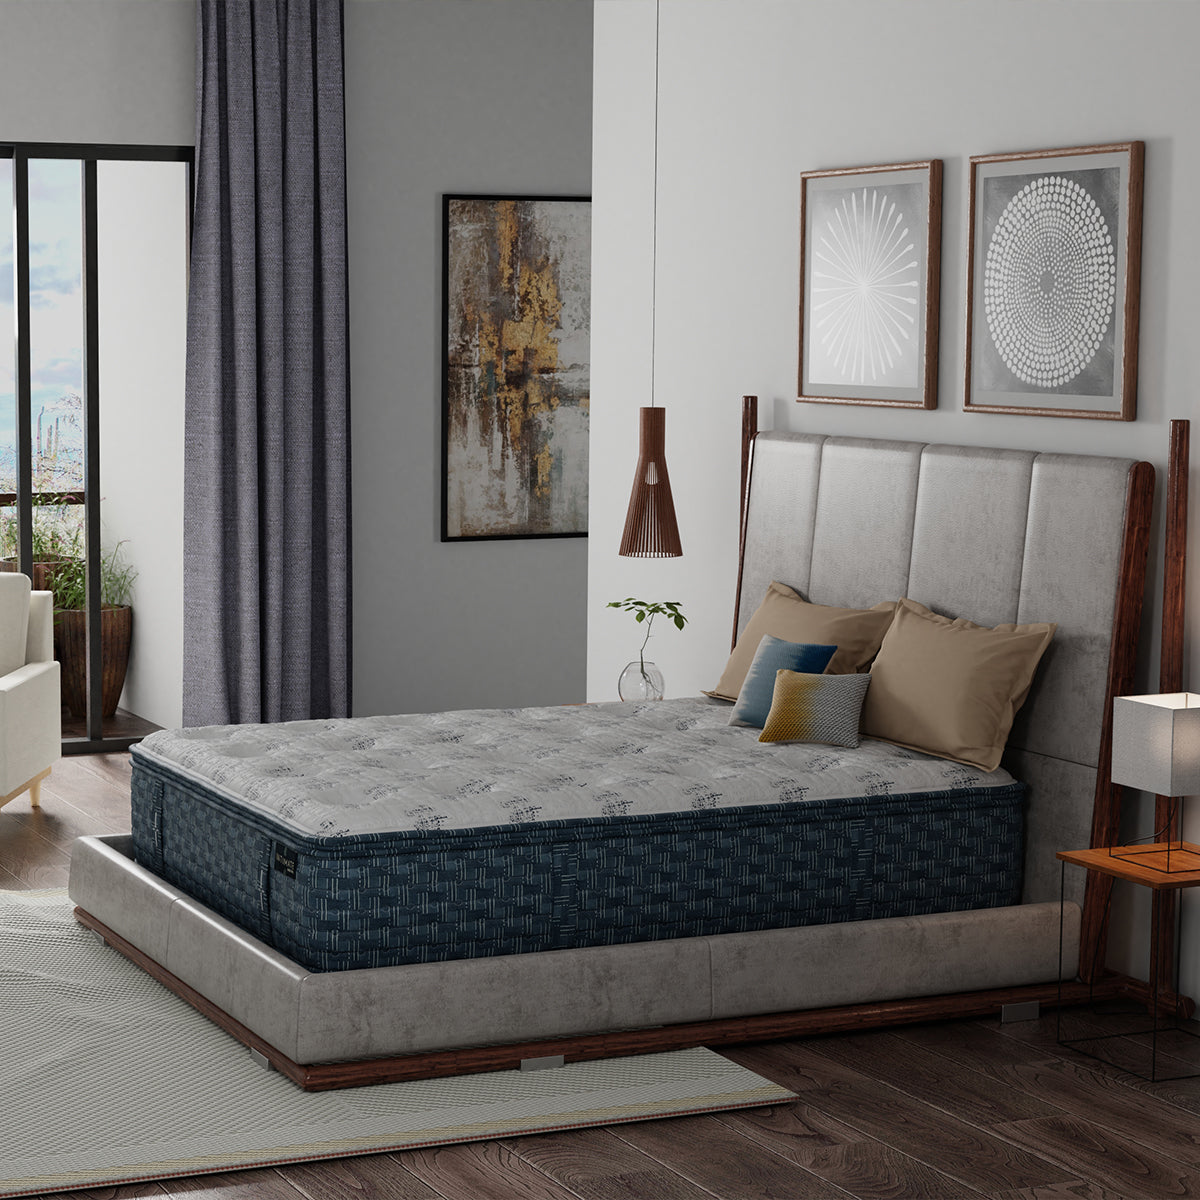 King Koil Williamsburg Plush mattress on an upholstered platform bed in a clean modern bedroom with large airy windows